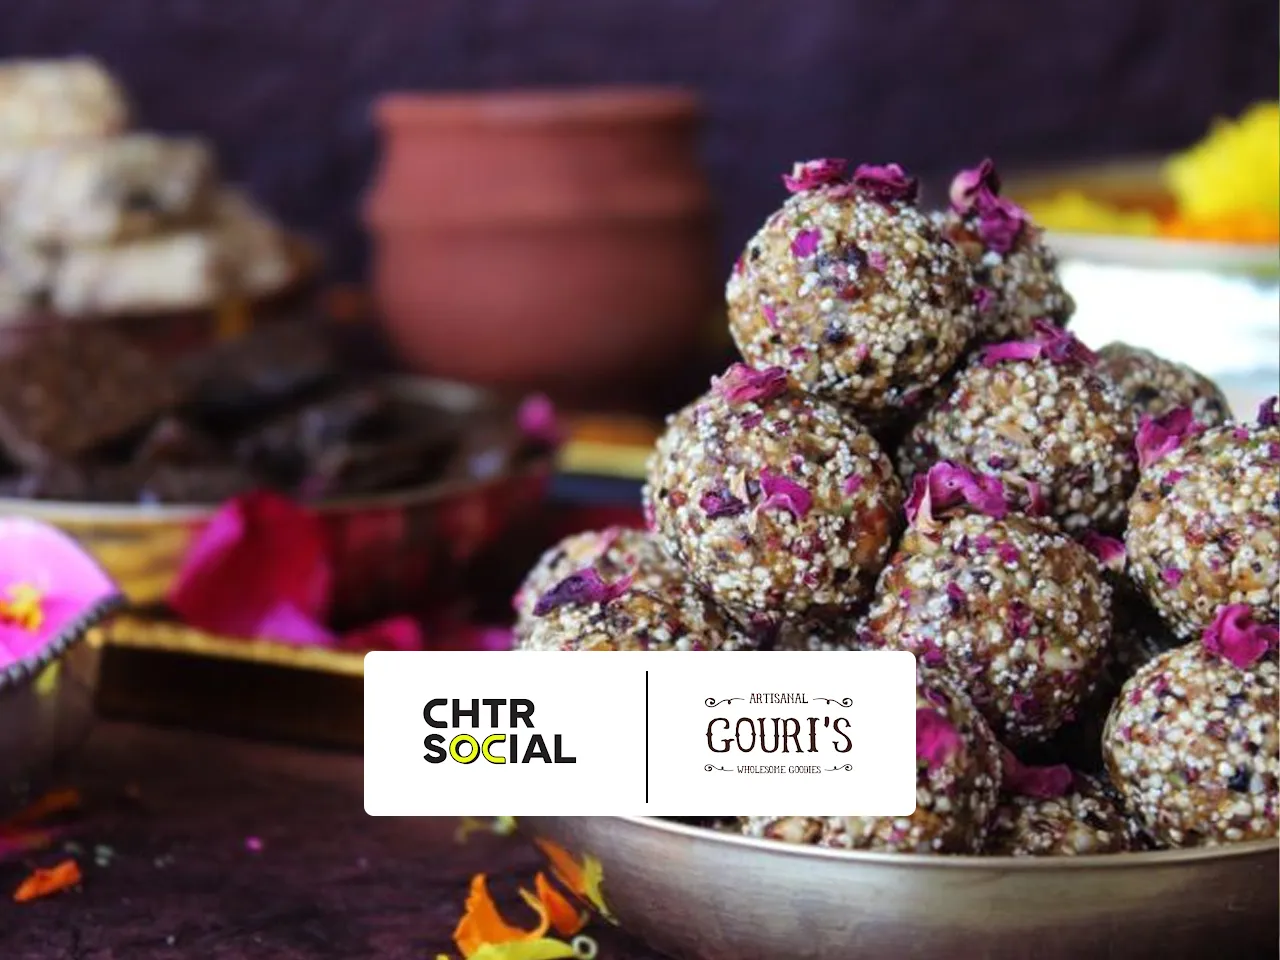 ChtrSocial wins social media mandate for Gouri's Goodies